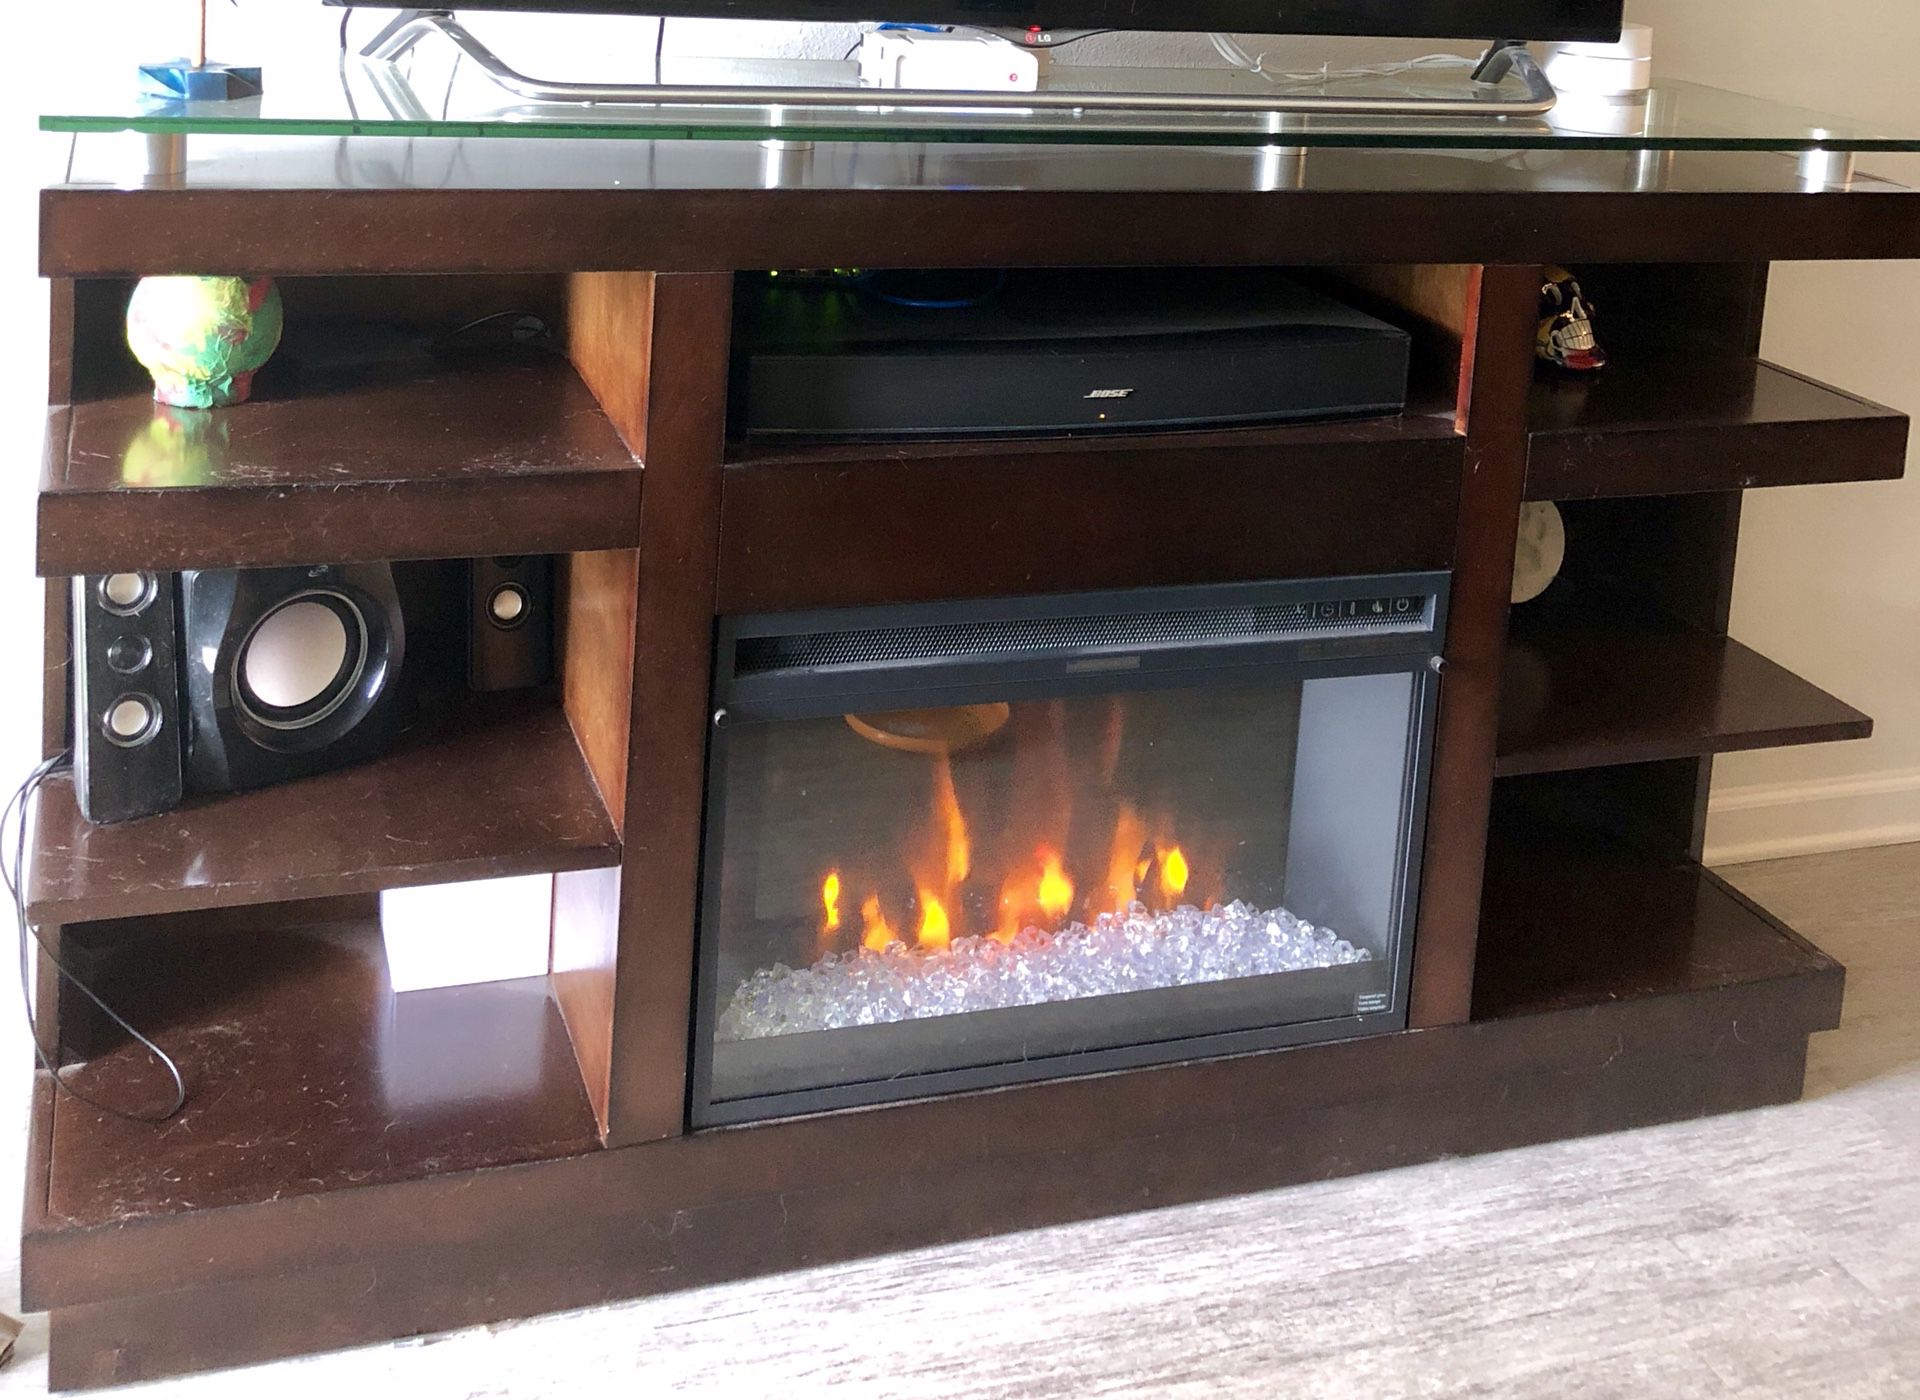 Tv stand with fireplace